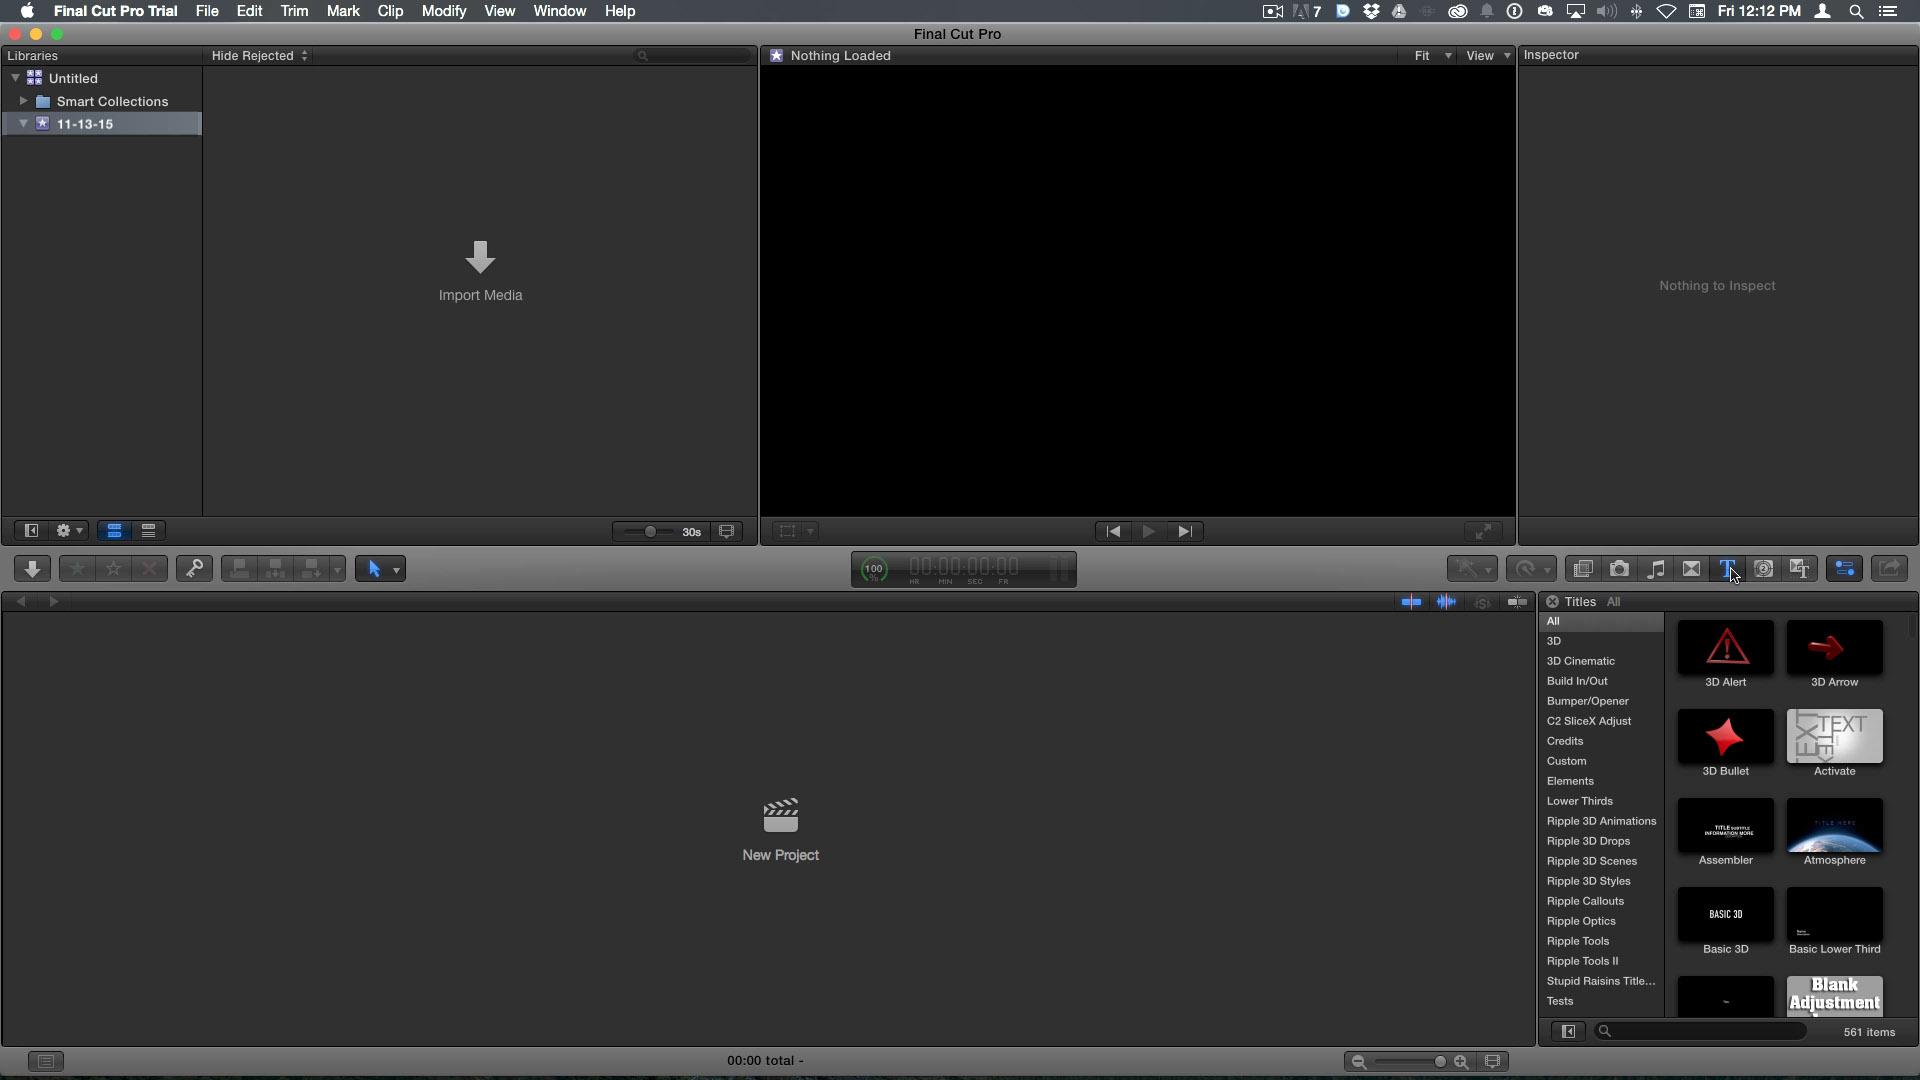 The Effects, Music, and Titles Browser of Final Cut Pro X